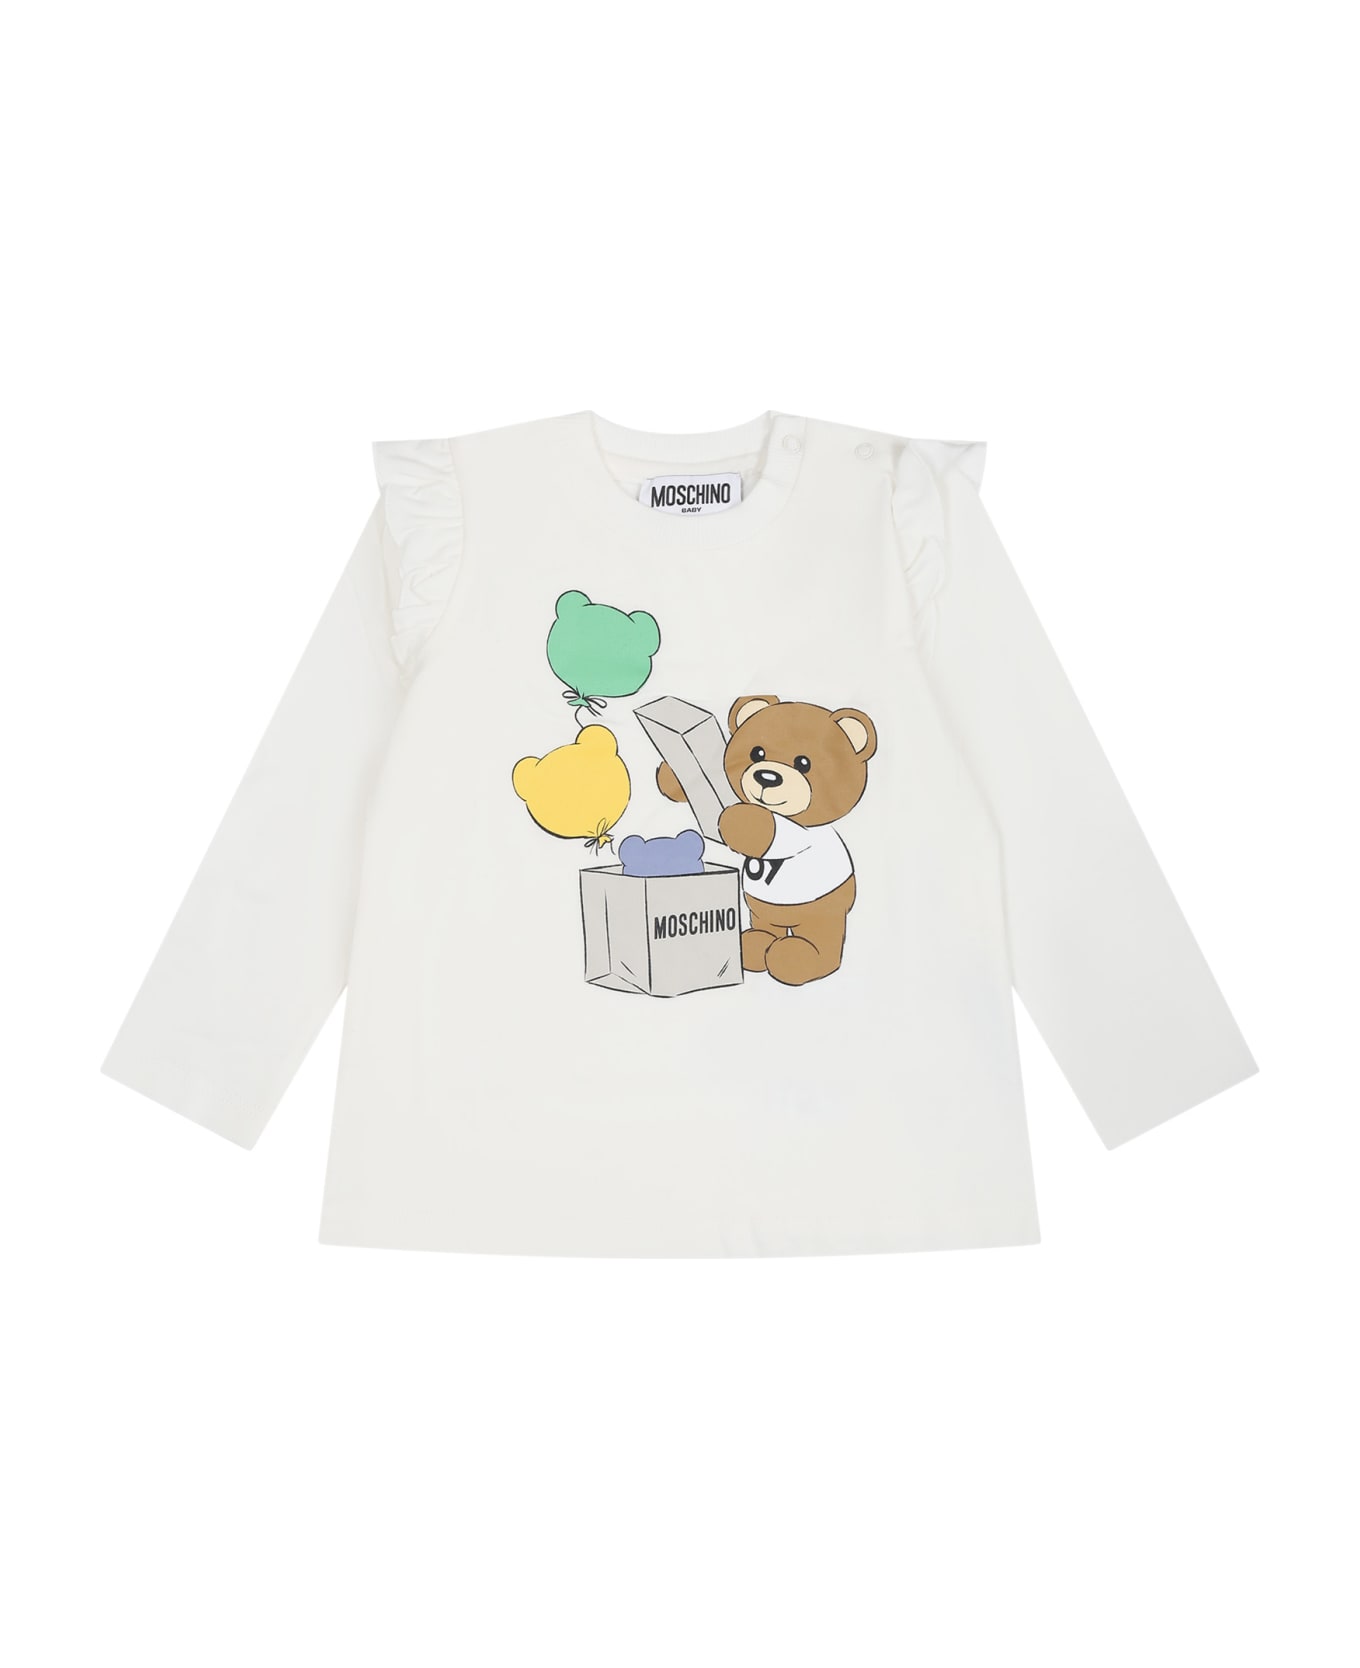 Moschino White T-tshirt For Baby Girl With Teddy Bear And Print - White